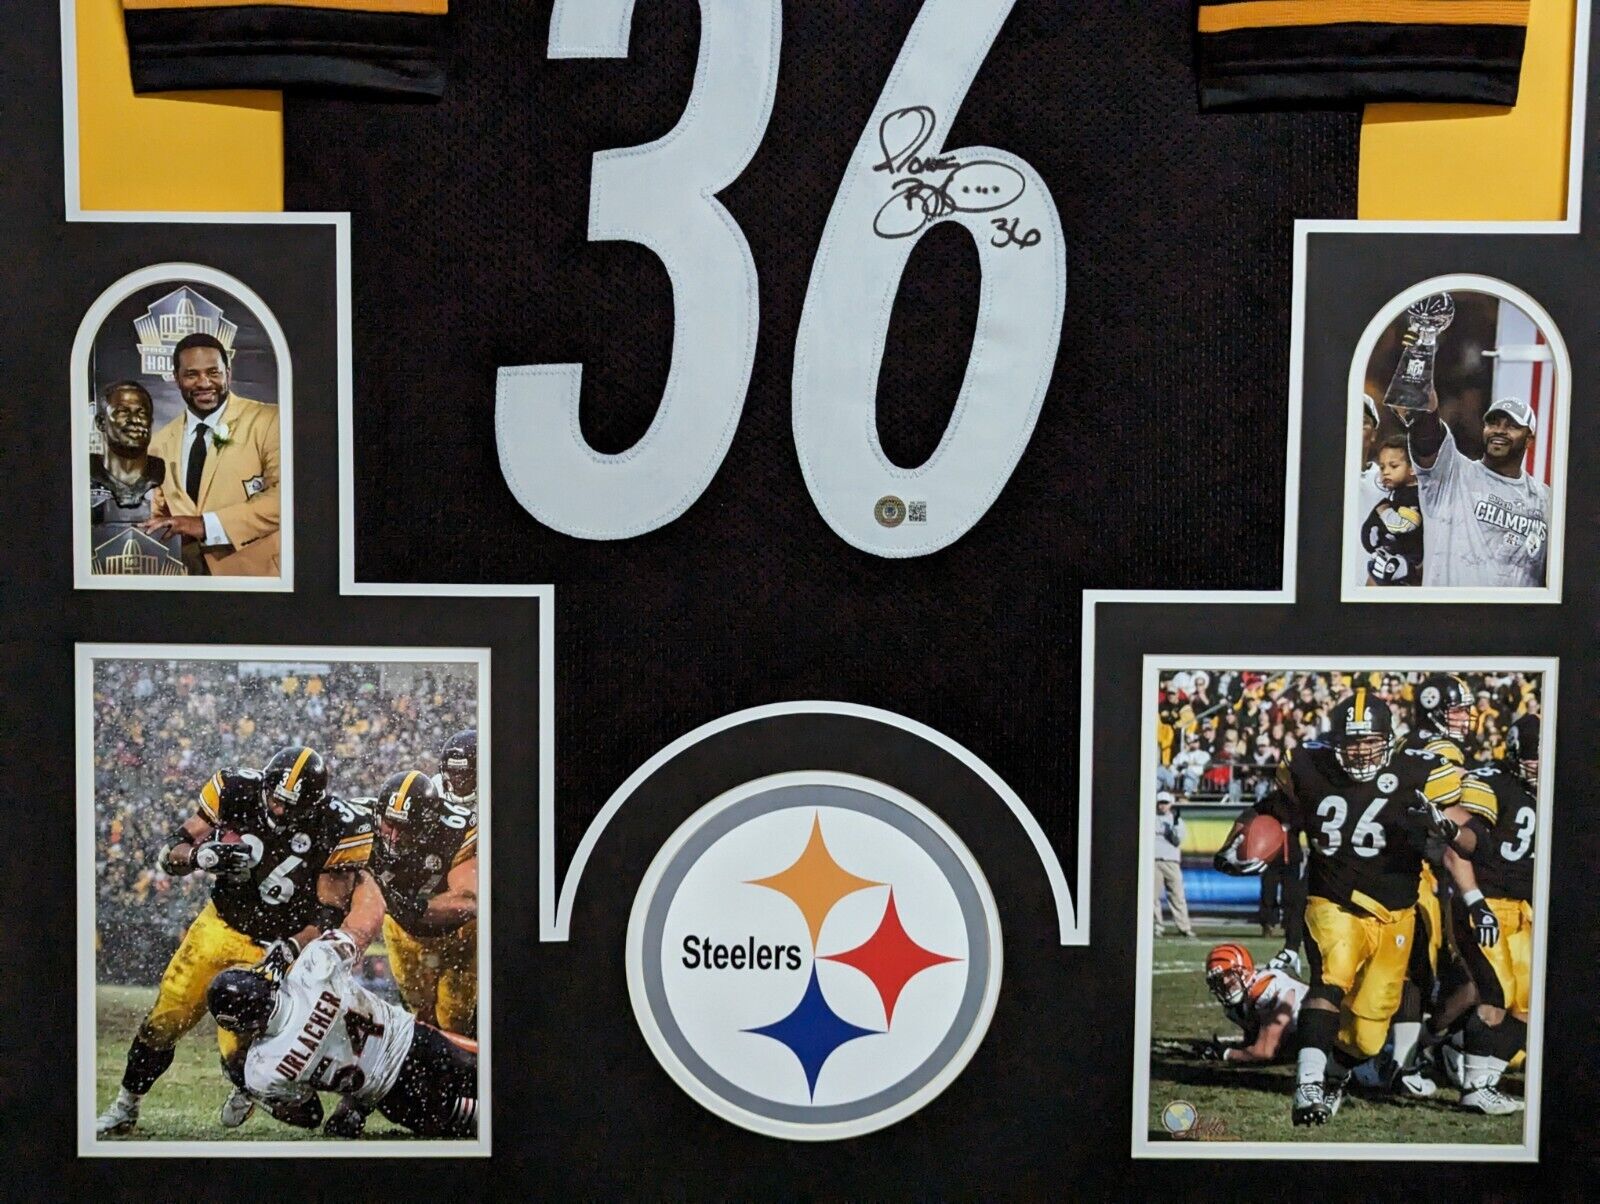 MVP Authentics Framed Pittsburgh Steelers Jerome Bettis Autographed Signed Jersey Beckett Coa 629.10 sports jersey framing , jersey framing